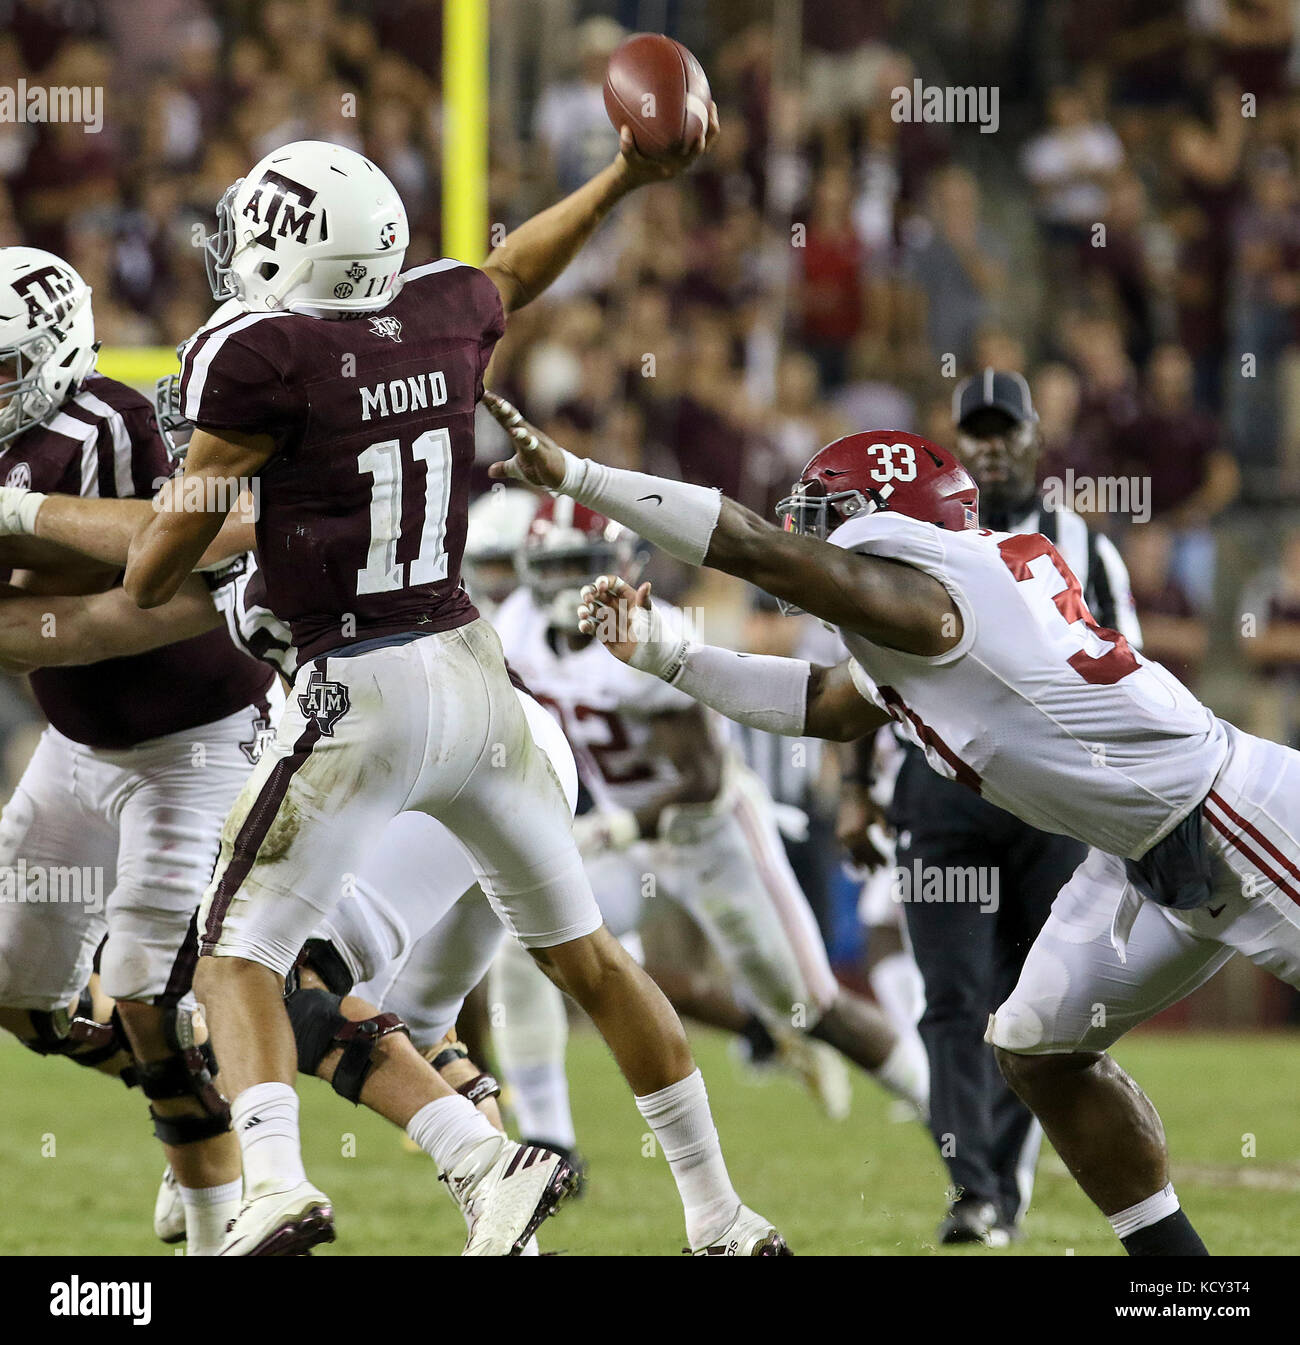 October 6, 2017: Texas A&M Aggies quarterback Kellen Mond (11) throws a pass while being pressured by Alabama Crimson Tide linebacker Anfernee Jennings (33) during the NCAA football game between the Alabama Crimson Tide and the Texas A&M Aggies at Kyle Field in College Station, TX; John Glaser/CSM. Stock Photo